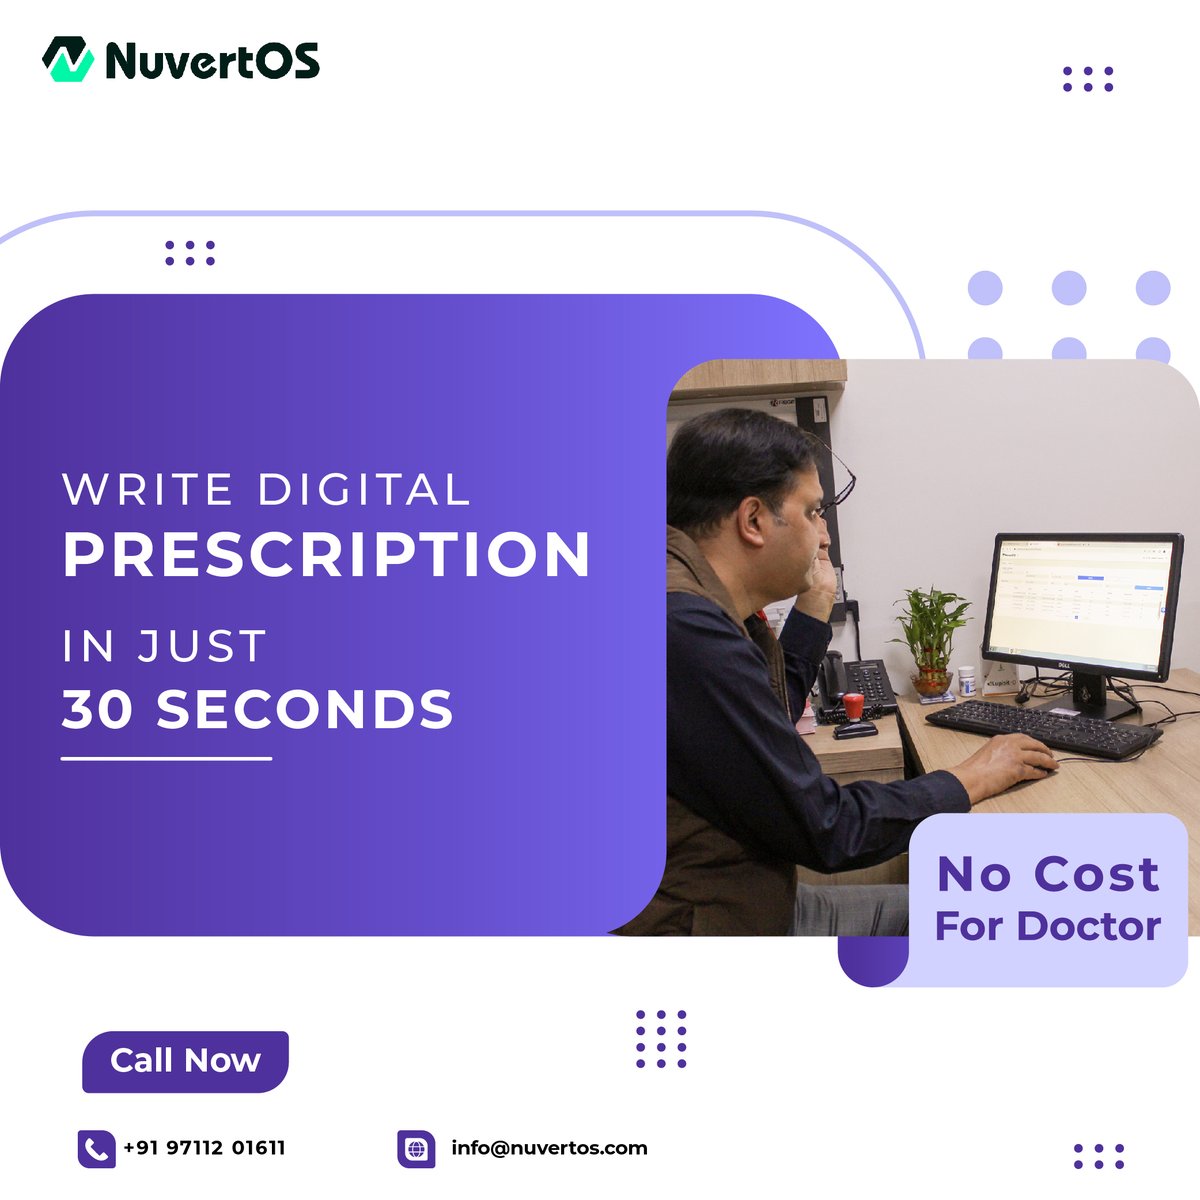 Are you Aware? The new guideline by NMC mandates the doctor to issue an e-prescription for the tele-consultation.
So Prescribe Effortlessly in Just 30 Seconds! No Charges for Doctors.
Call Now: 9711201611

#nuvertos #timestreamtechnologies #prescription #nmc #nmcguidelines #emr